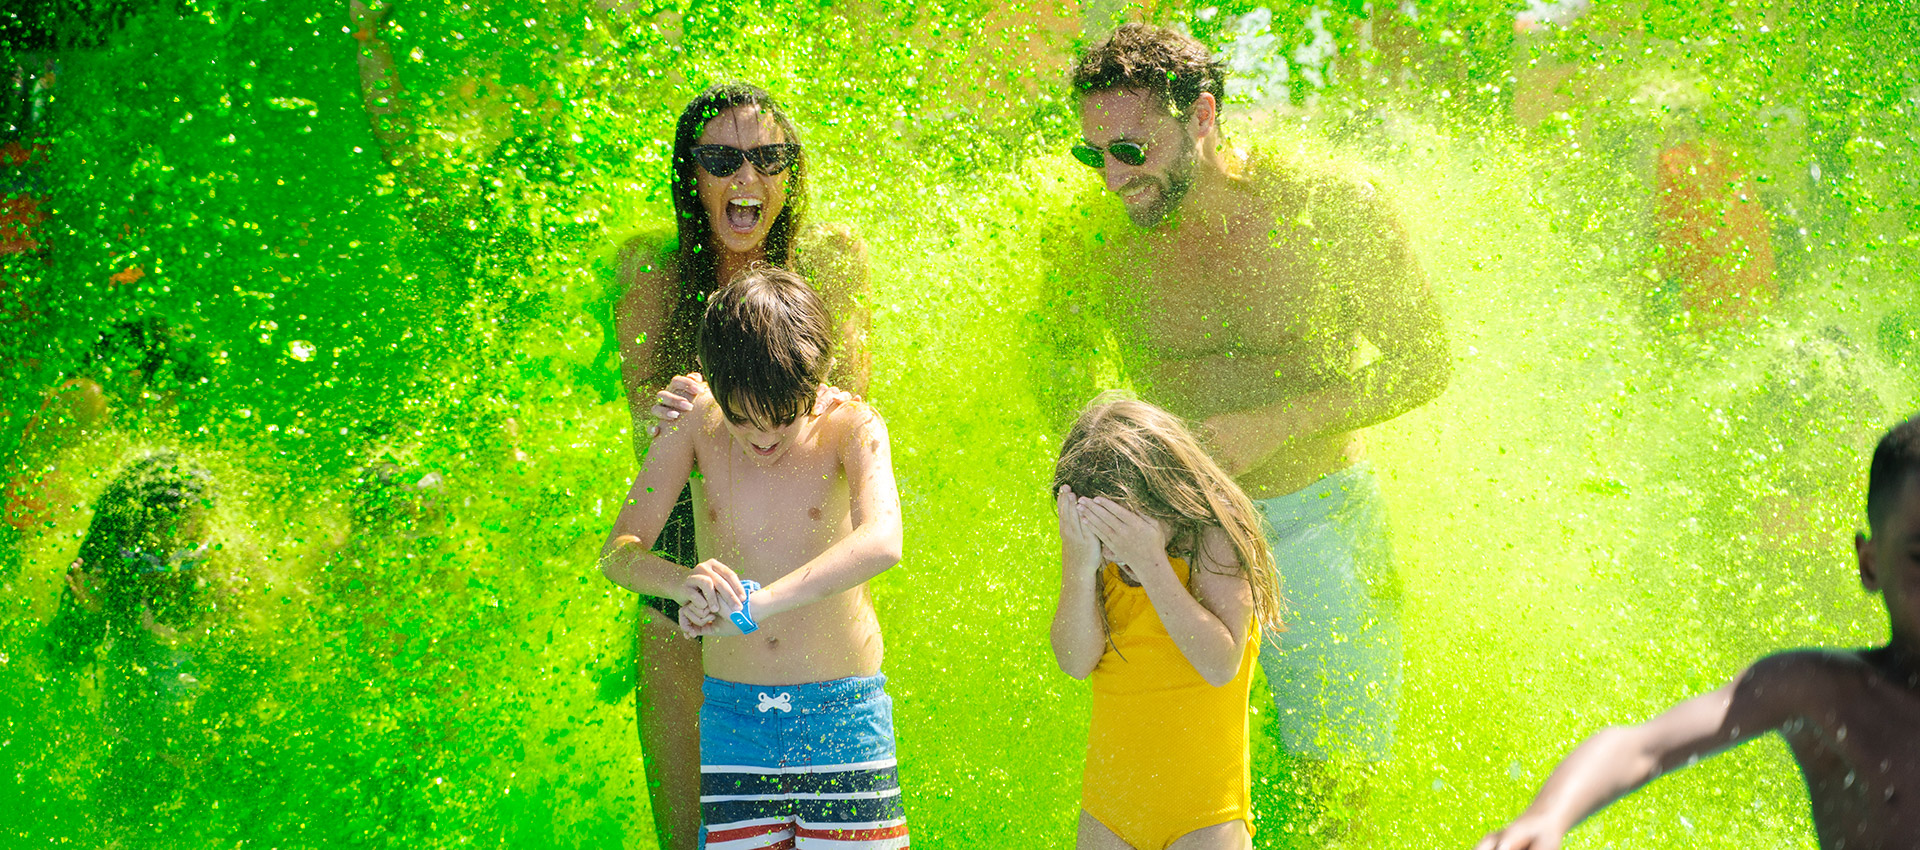 Get Slimed at Nickelodeon all Inclusive Resorts